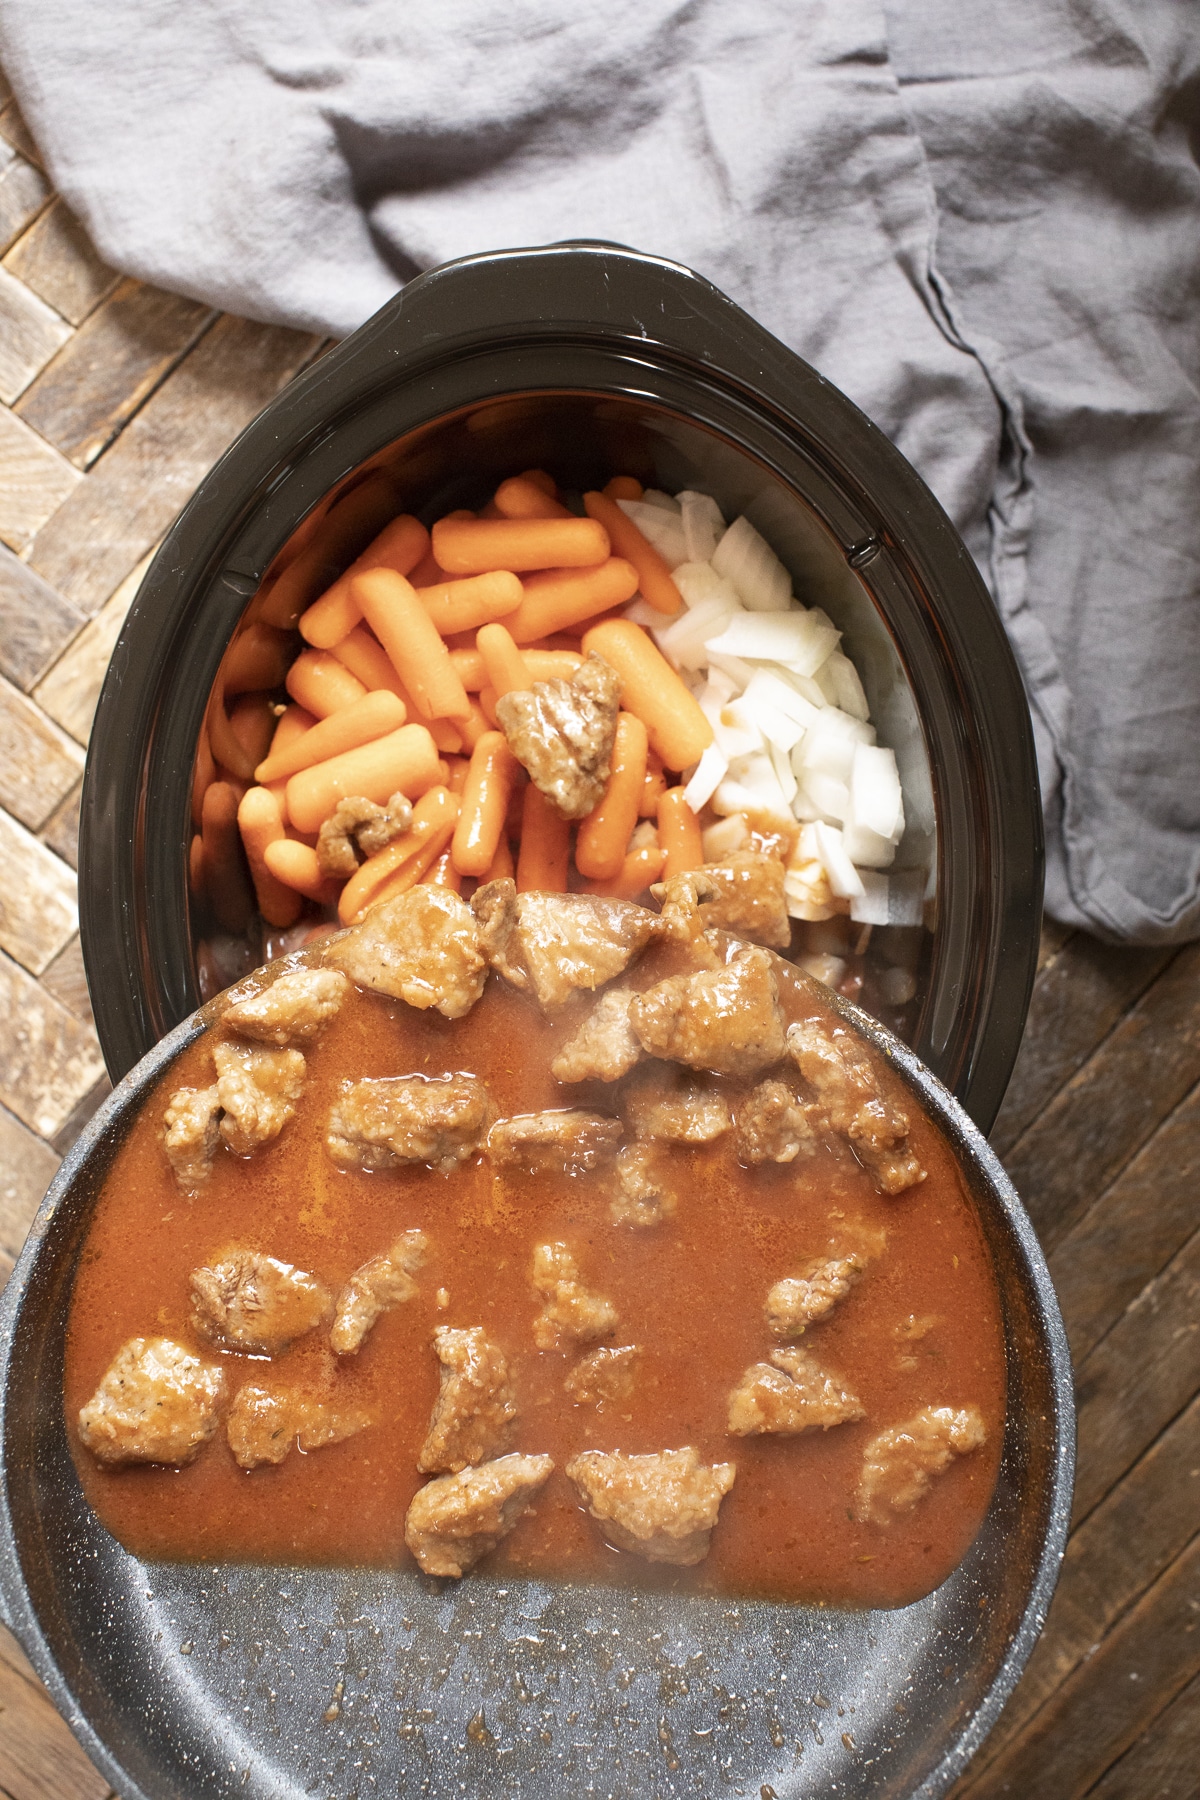 Best Slow Cooker Beef Stew - The Magical Slow Cooker